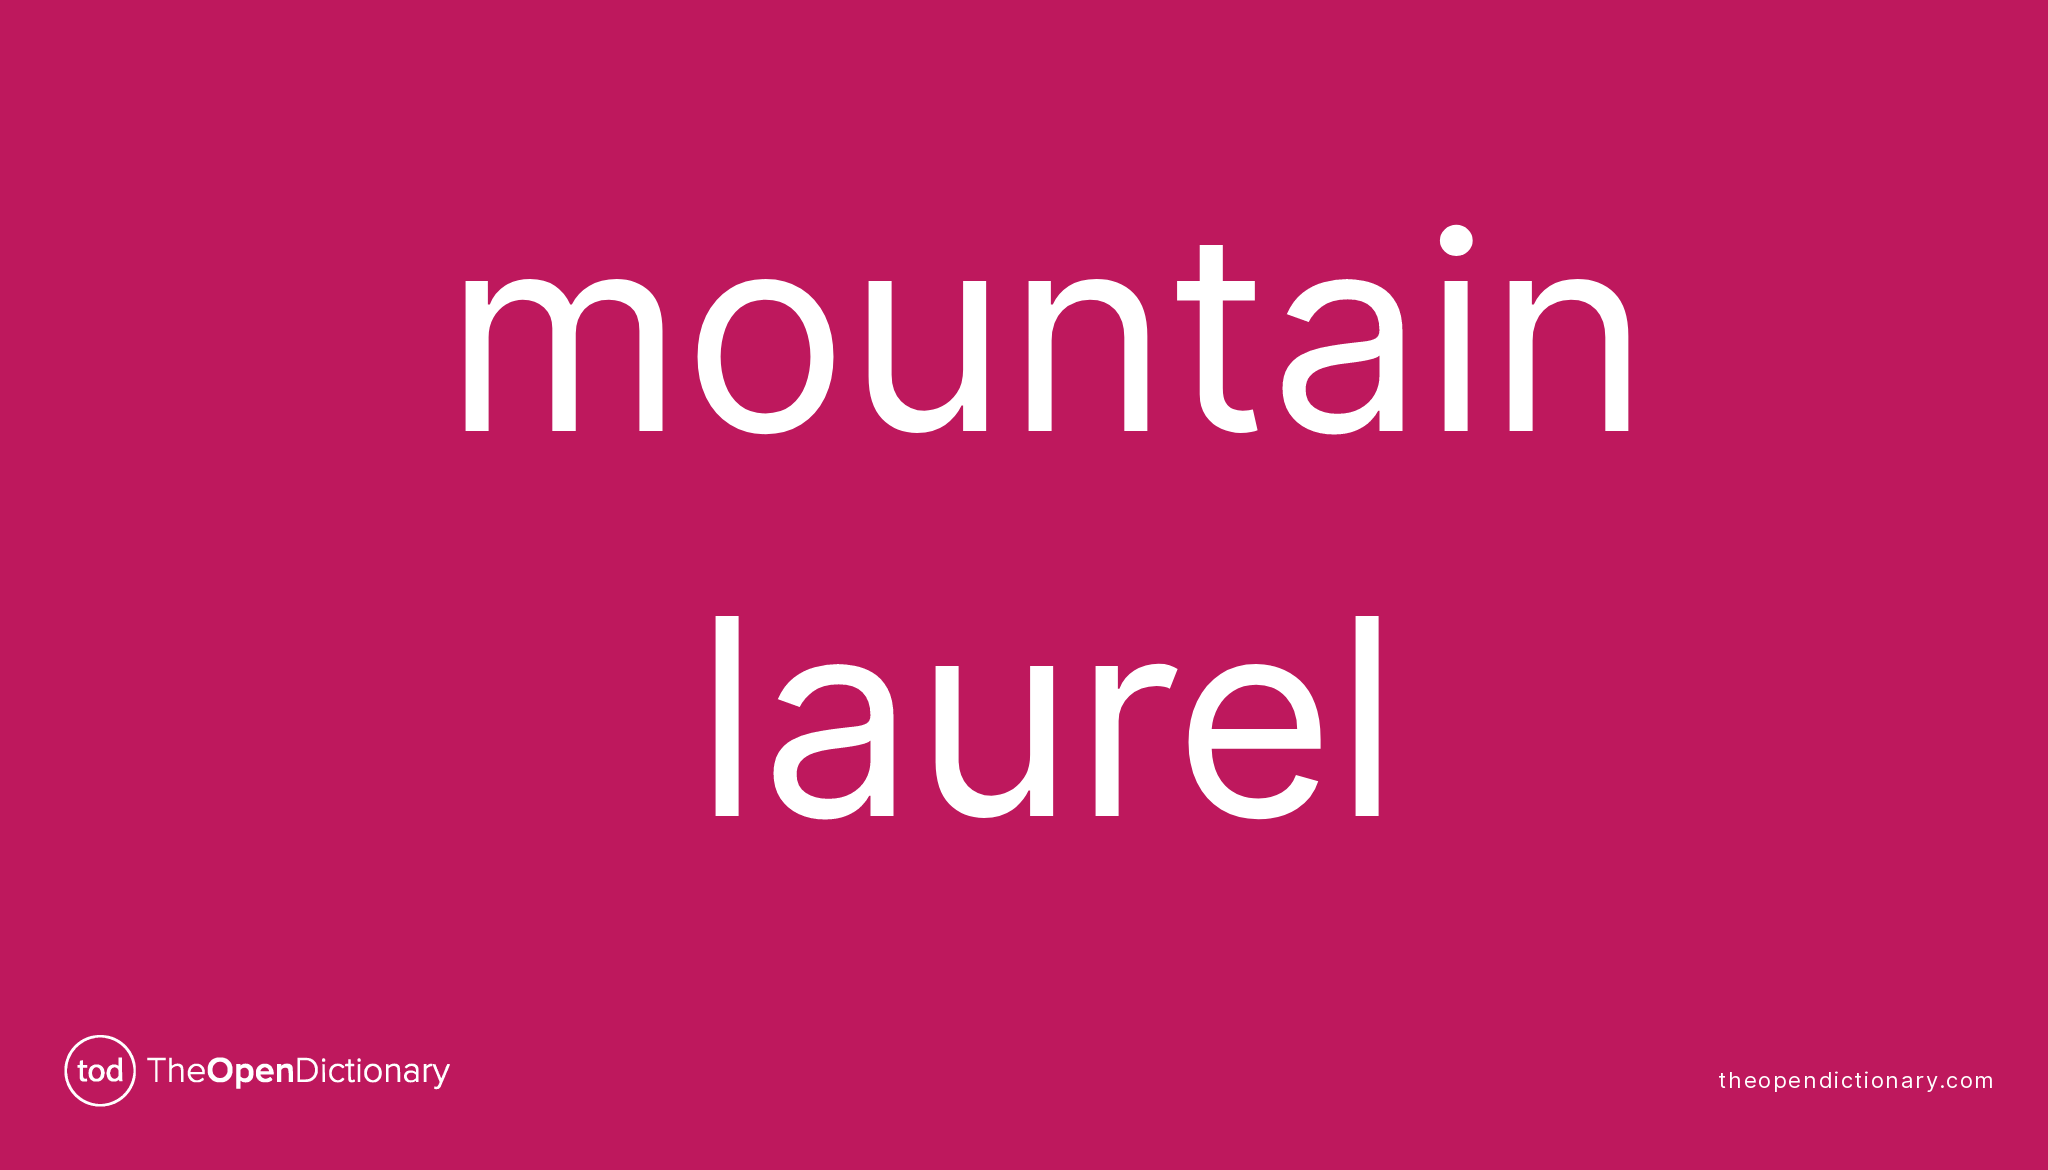 Mountain laurel | Meaning of Mountain laurel | Definition of Mountain ...